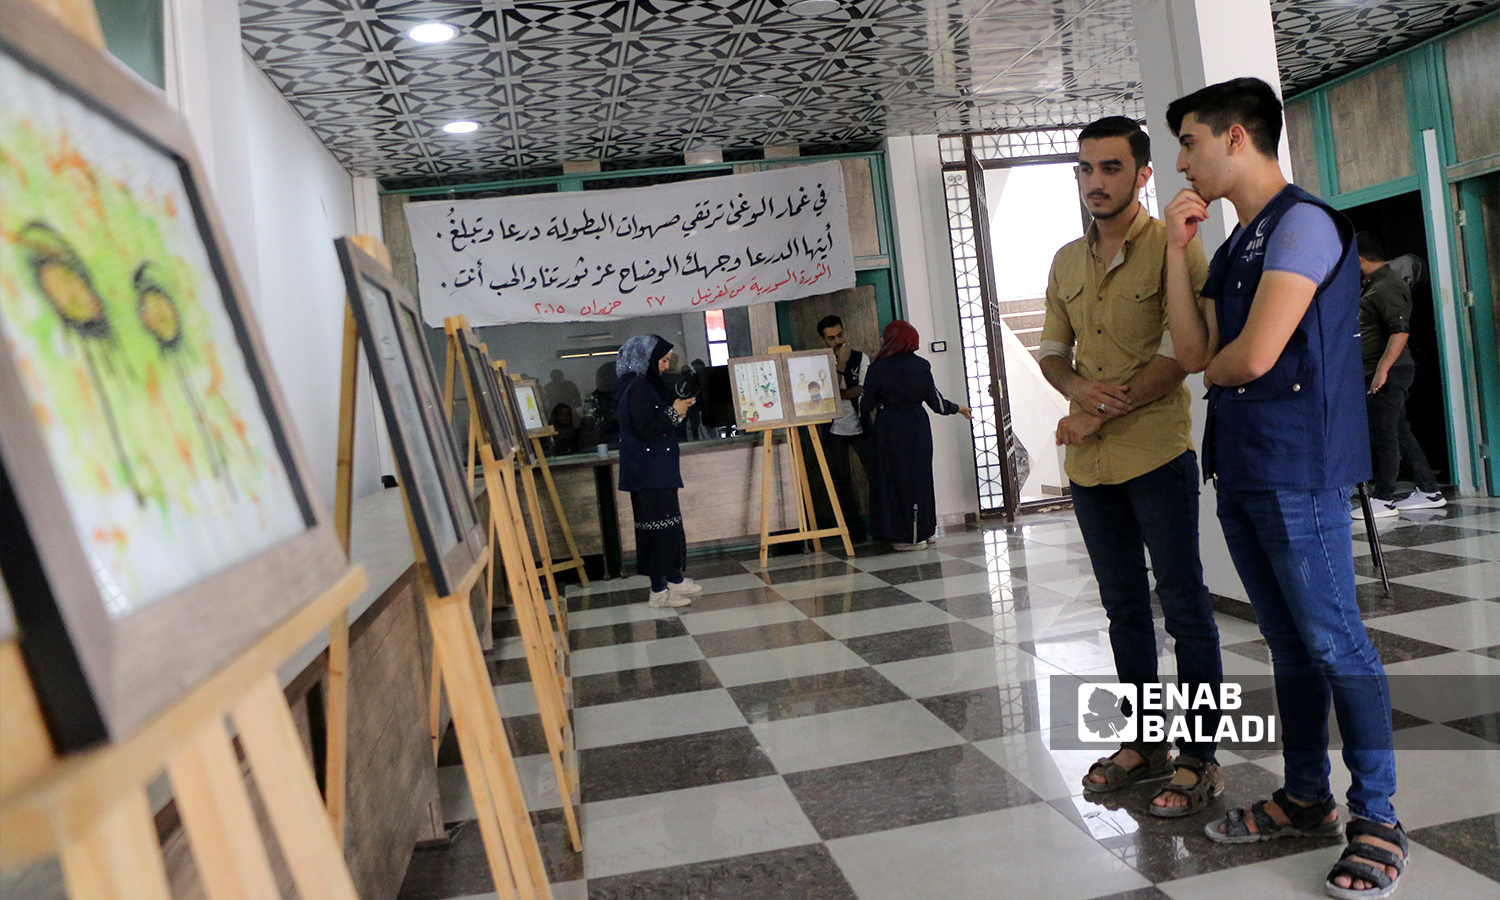 An art exhibition under the slogan “Do Not Suffocate Truth” was held in Azaz city in Aleppo governorate in remembrance of the Eastern Ghouta’s chemical massacre - 21 August 2021 (Enab Baladi / Walid Othman)
